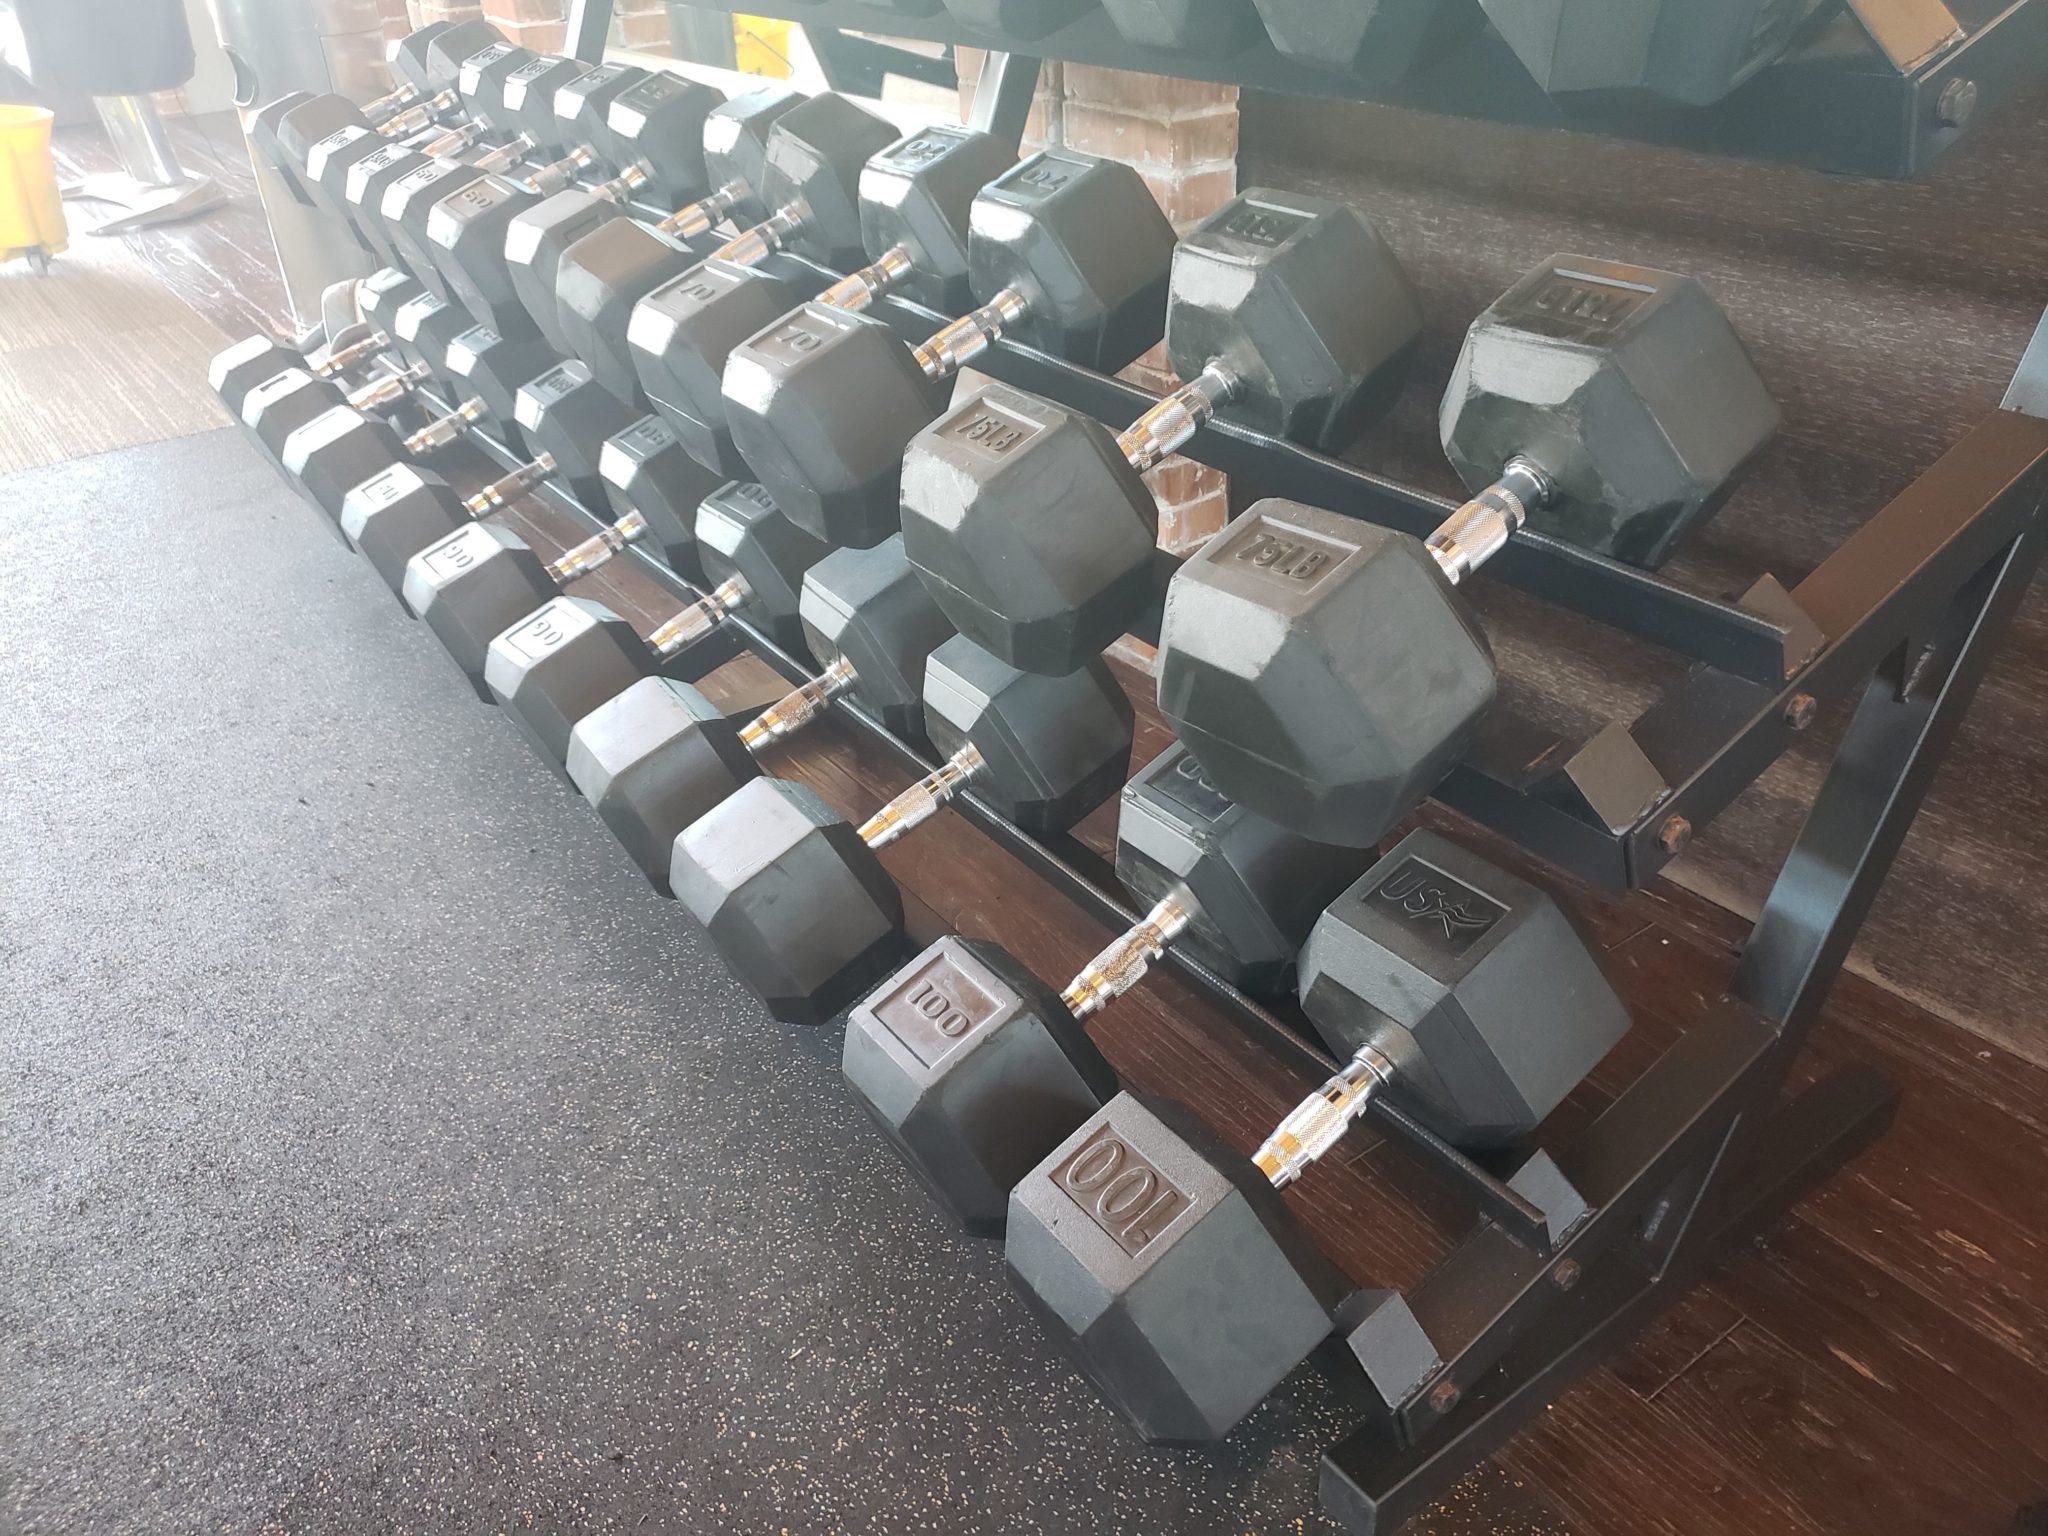 a rack of weights on a floor